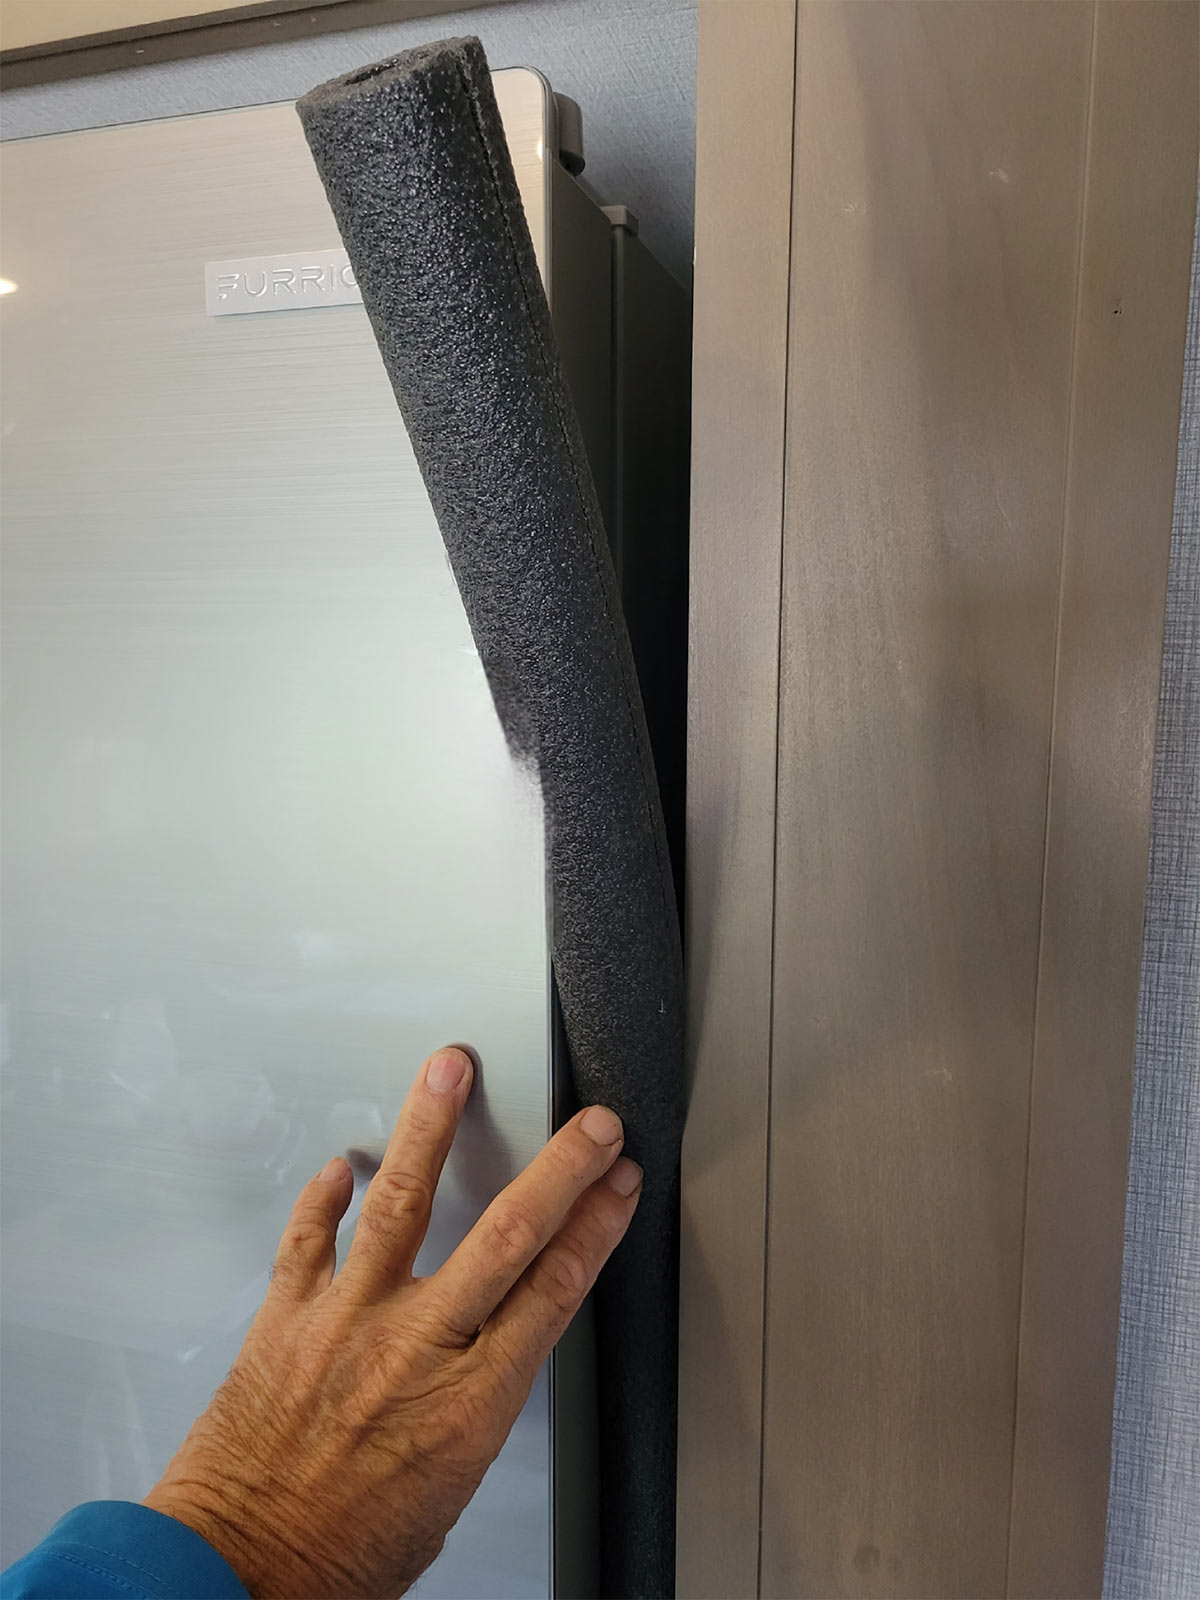 a hand places the foam insulation between the refrigerator and cabinet walls